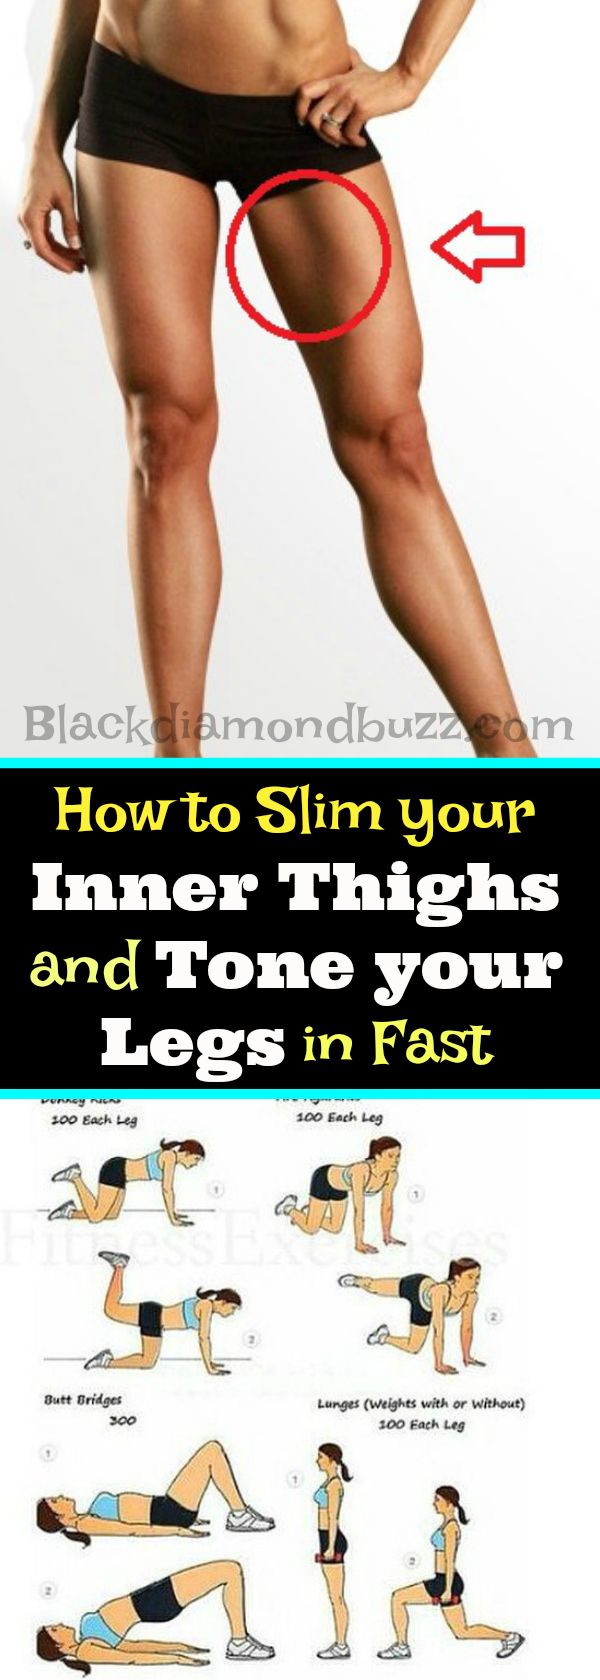 Fitness Motivation How To Slim Your Inner Thighs And Tone Your Legs In Fast In 30 Days These 3743